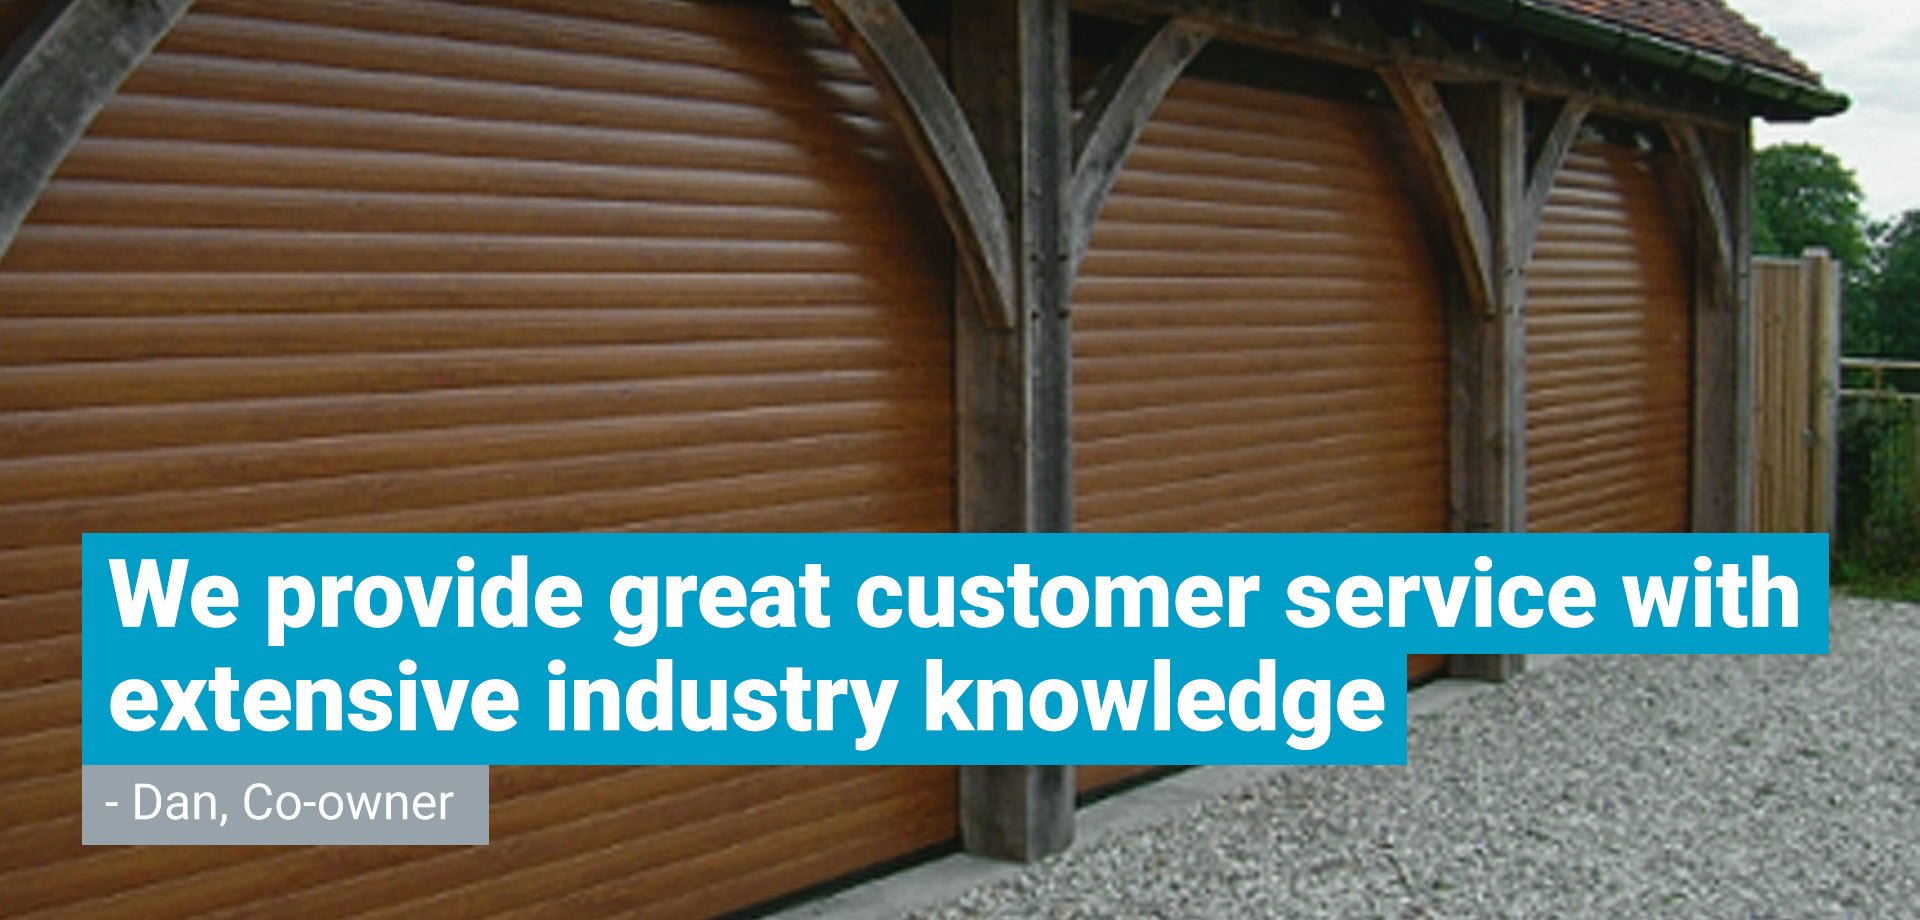 Three brown wood-look roller doors overlayed with a quote by co-owner Dan sayine "We provide great customer service with extensive industry knowledge"